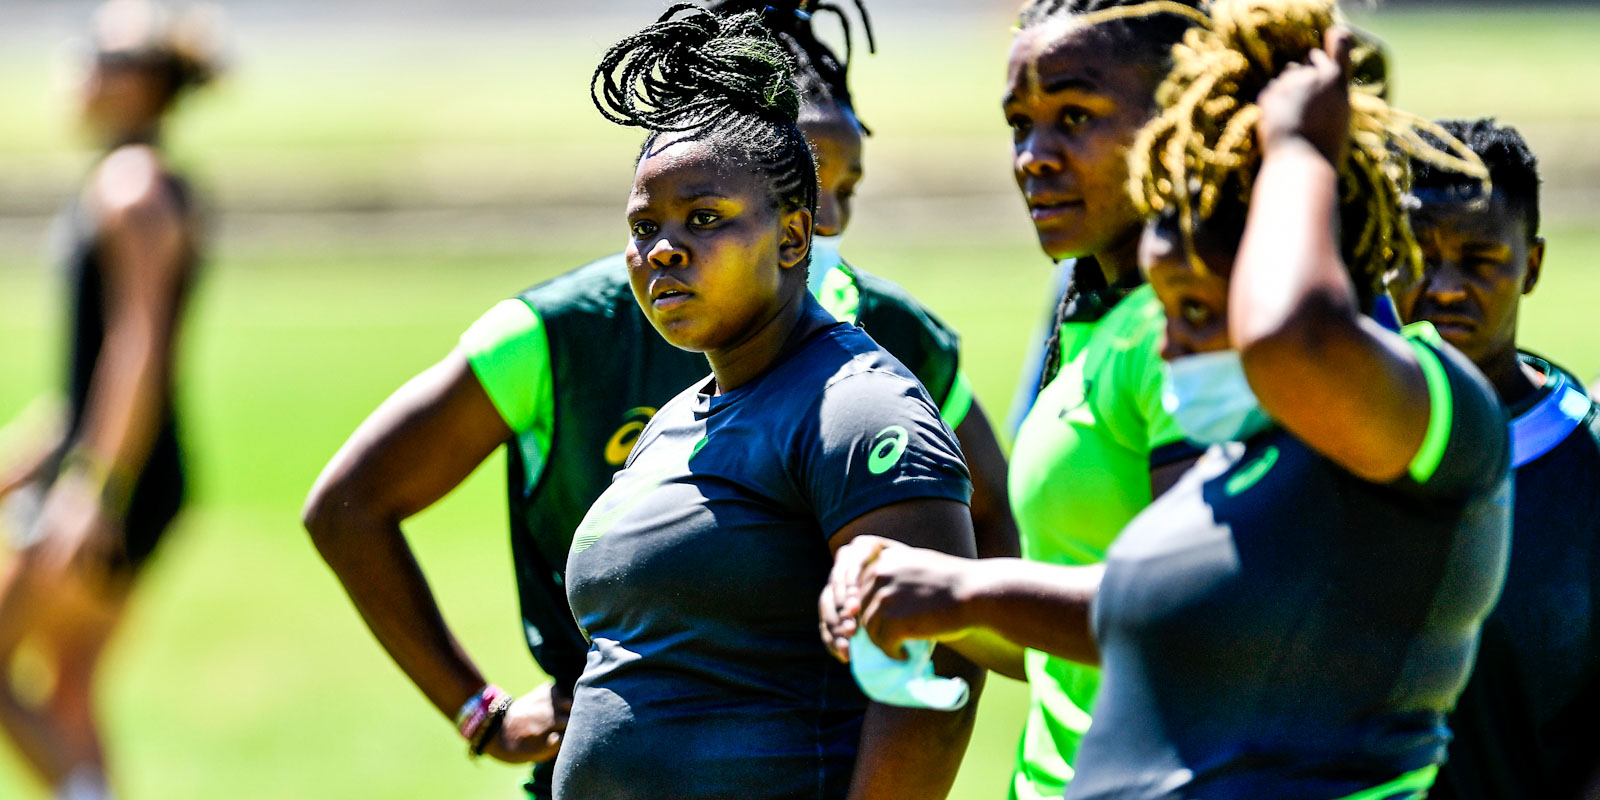 Sanelisiwe Charlie scored her first try for South Africa, in her 10th Test.